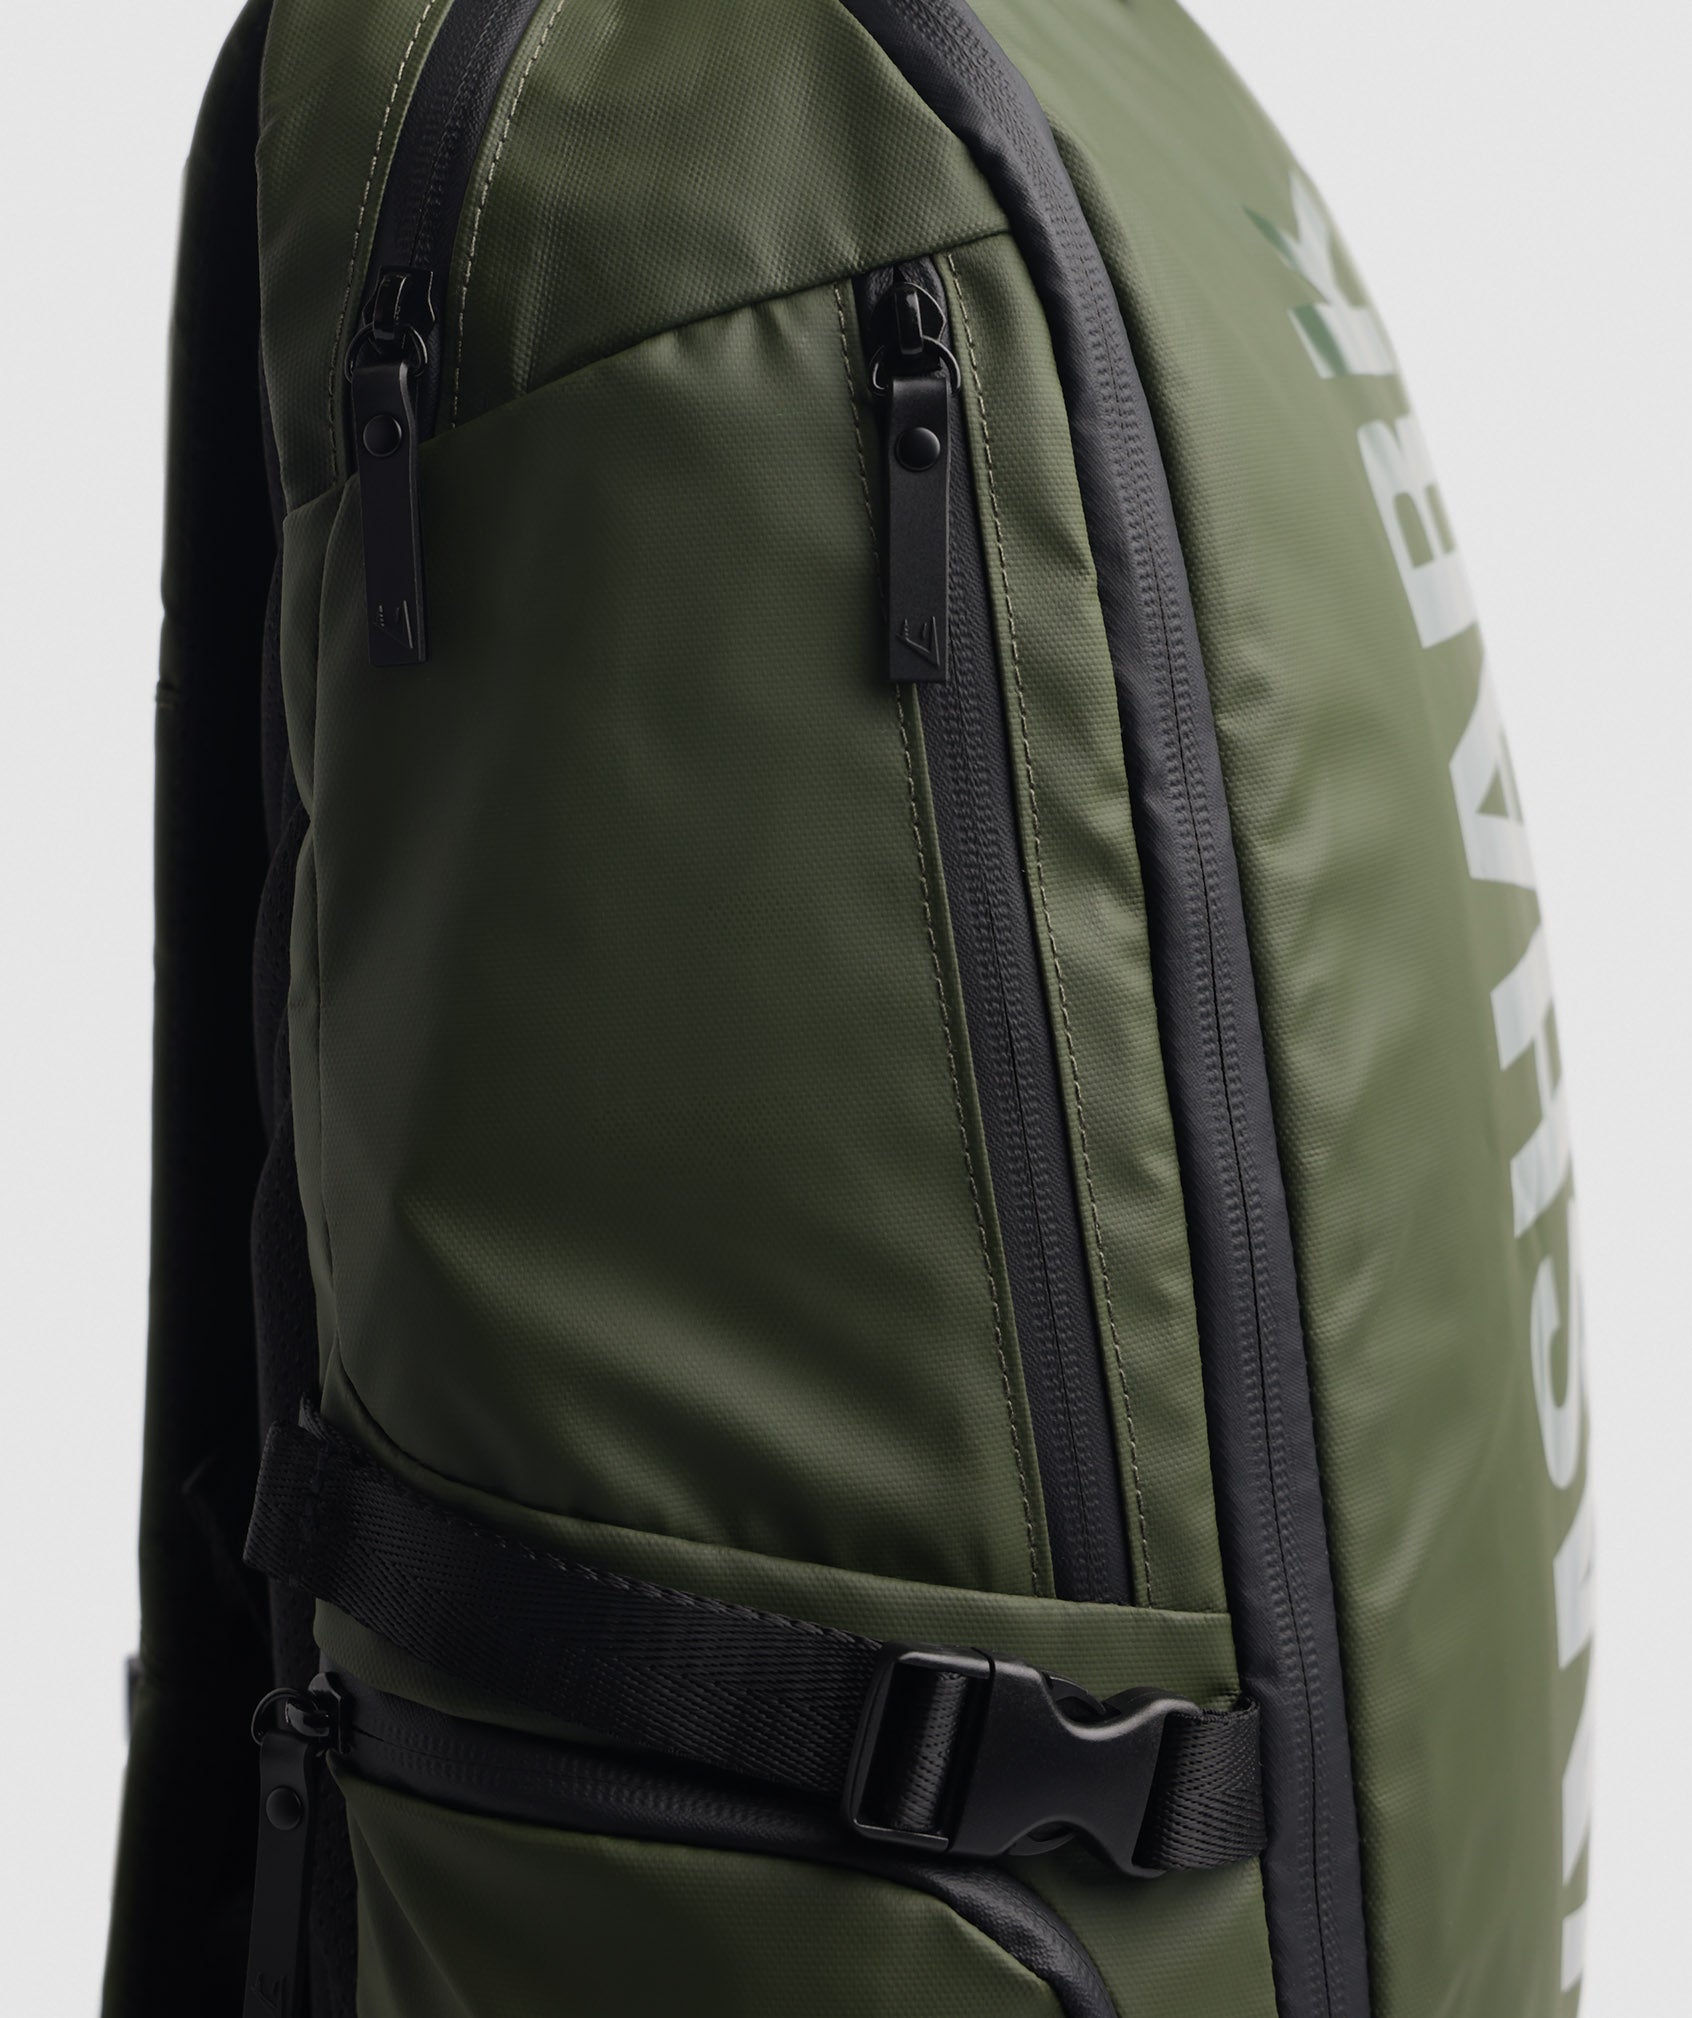 X-Series 0.3 Backpack in Core Olive